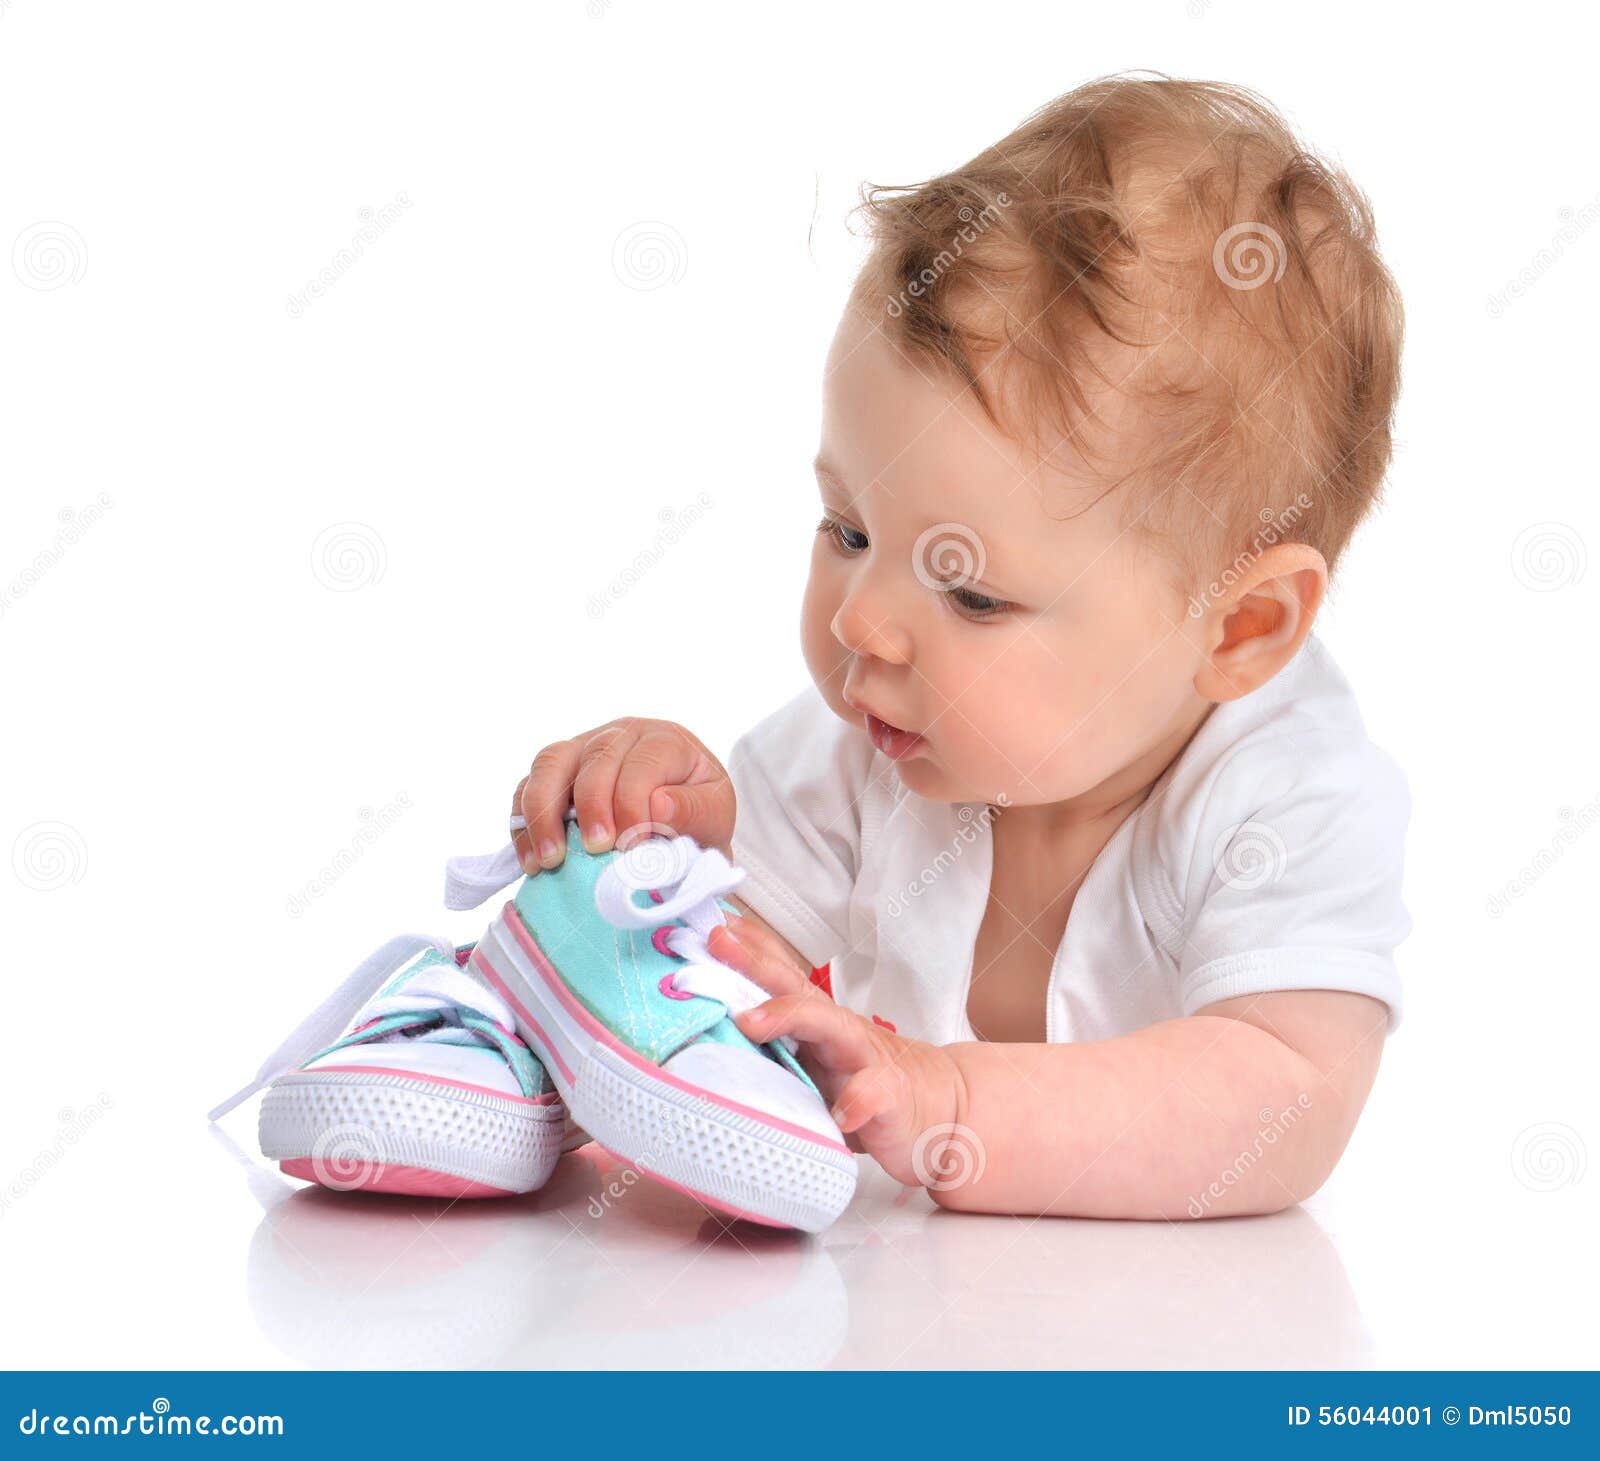 infant child baby girl lying happy searching new shoes 